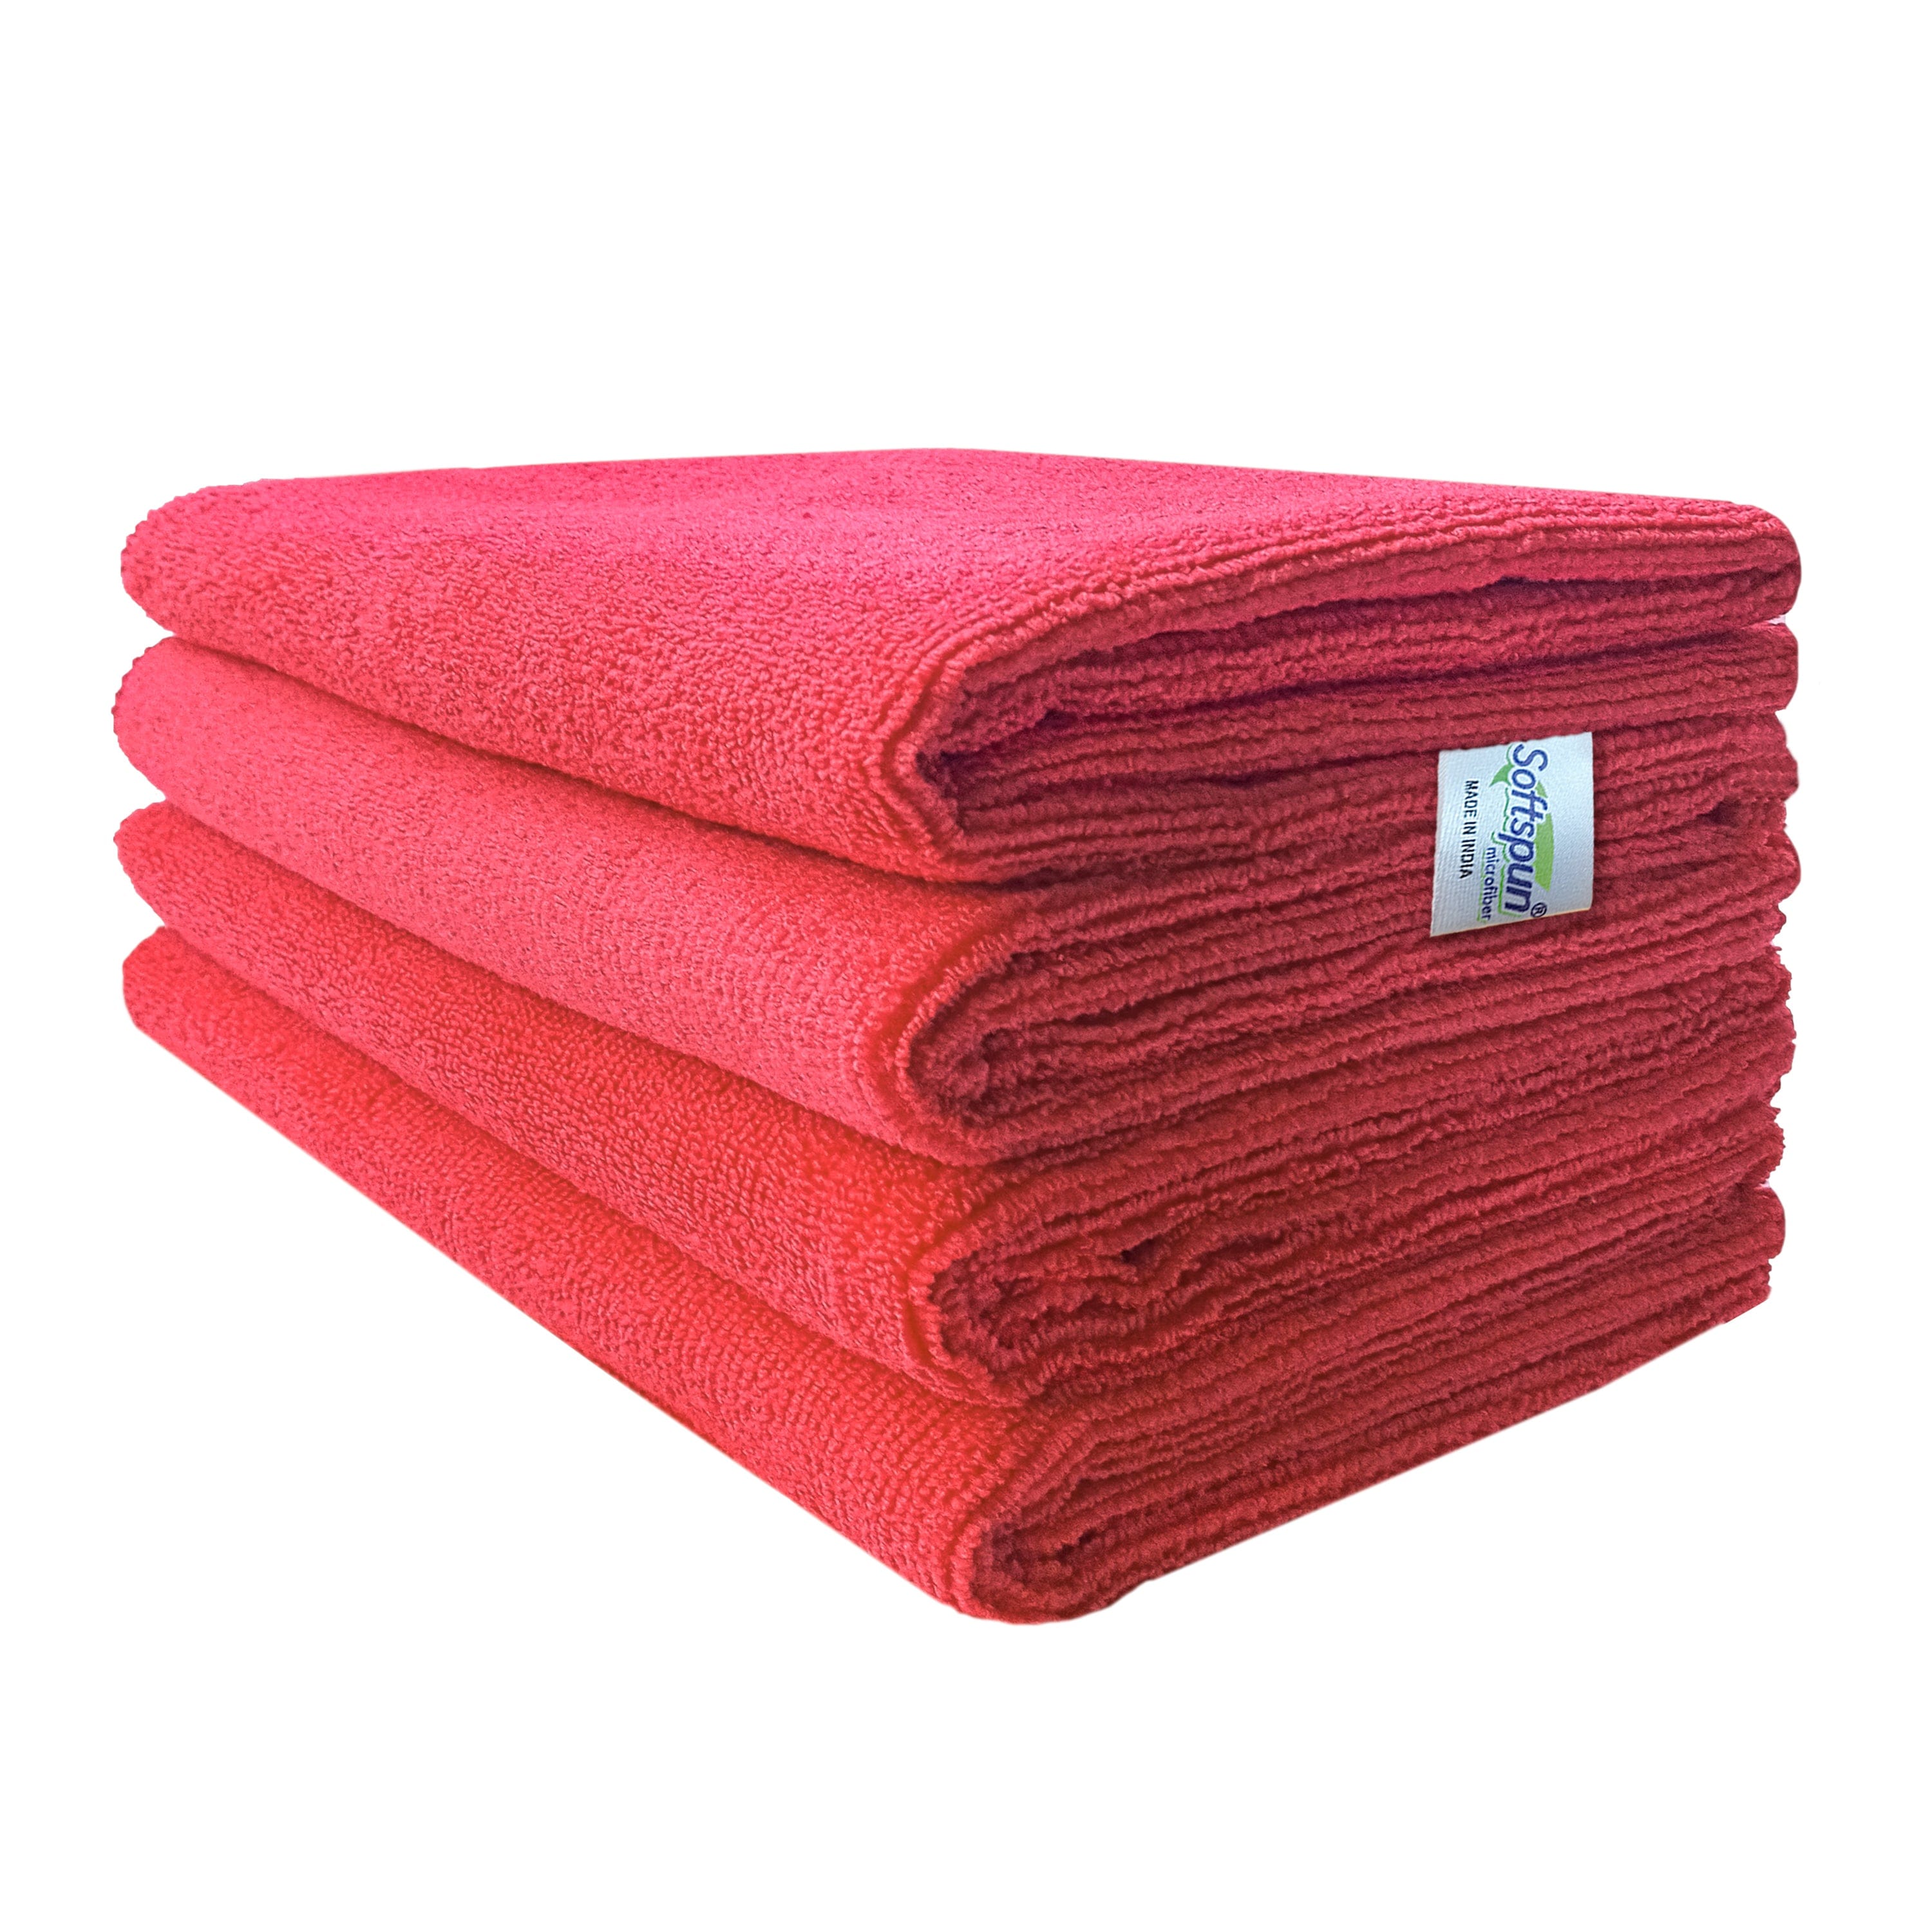 SOFTSPUN Microfiber Face Care Towel, 340 GSM. Super Soft & Comfortable, Quick Drying, Ultra Absorbent in Large Size.